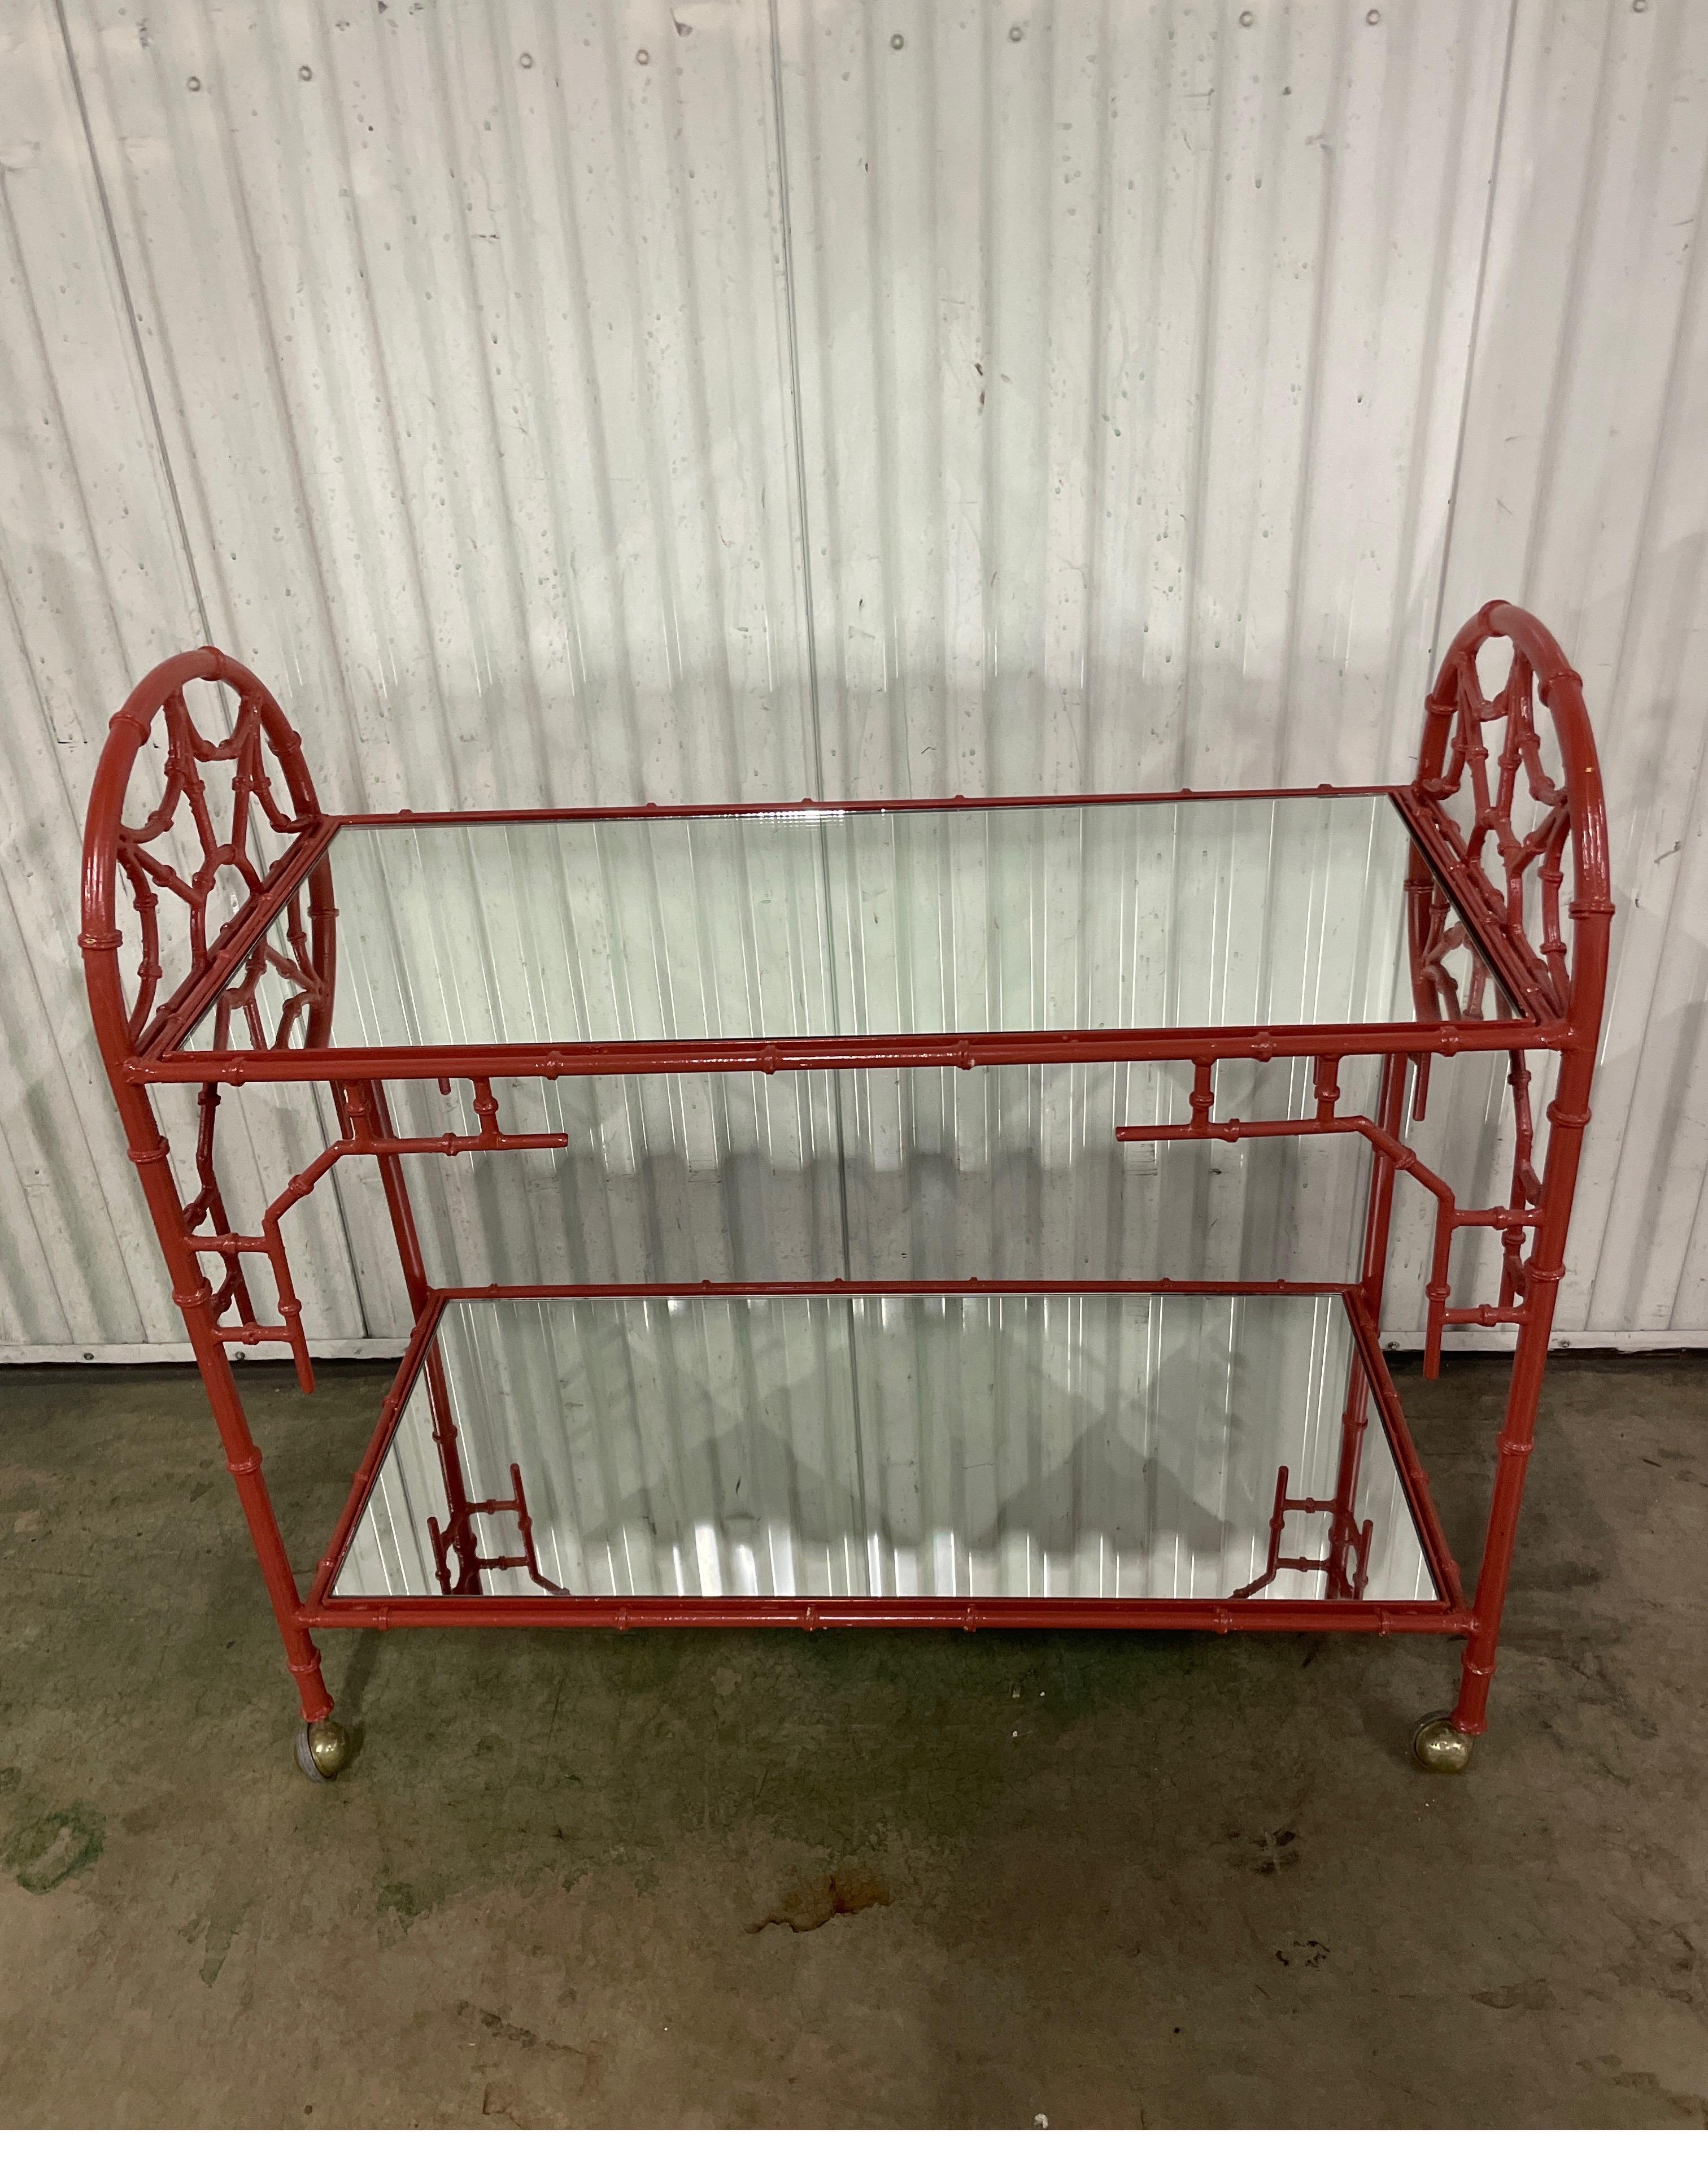 Vintage Chinoiserie bar cart with two mirrored shelves. Finished in a Chinese red lacquer. Beautiful fretwork design on all four sides. A very unique find.